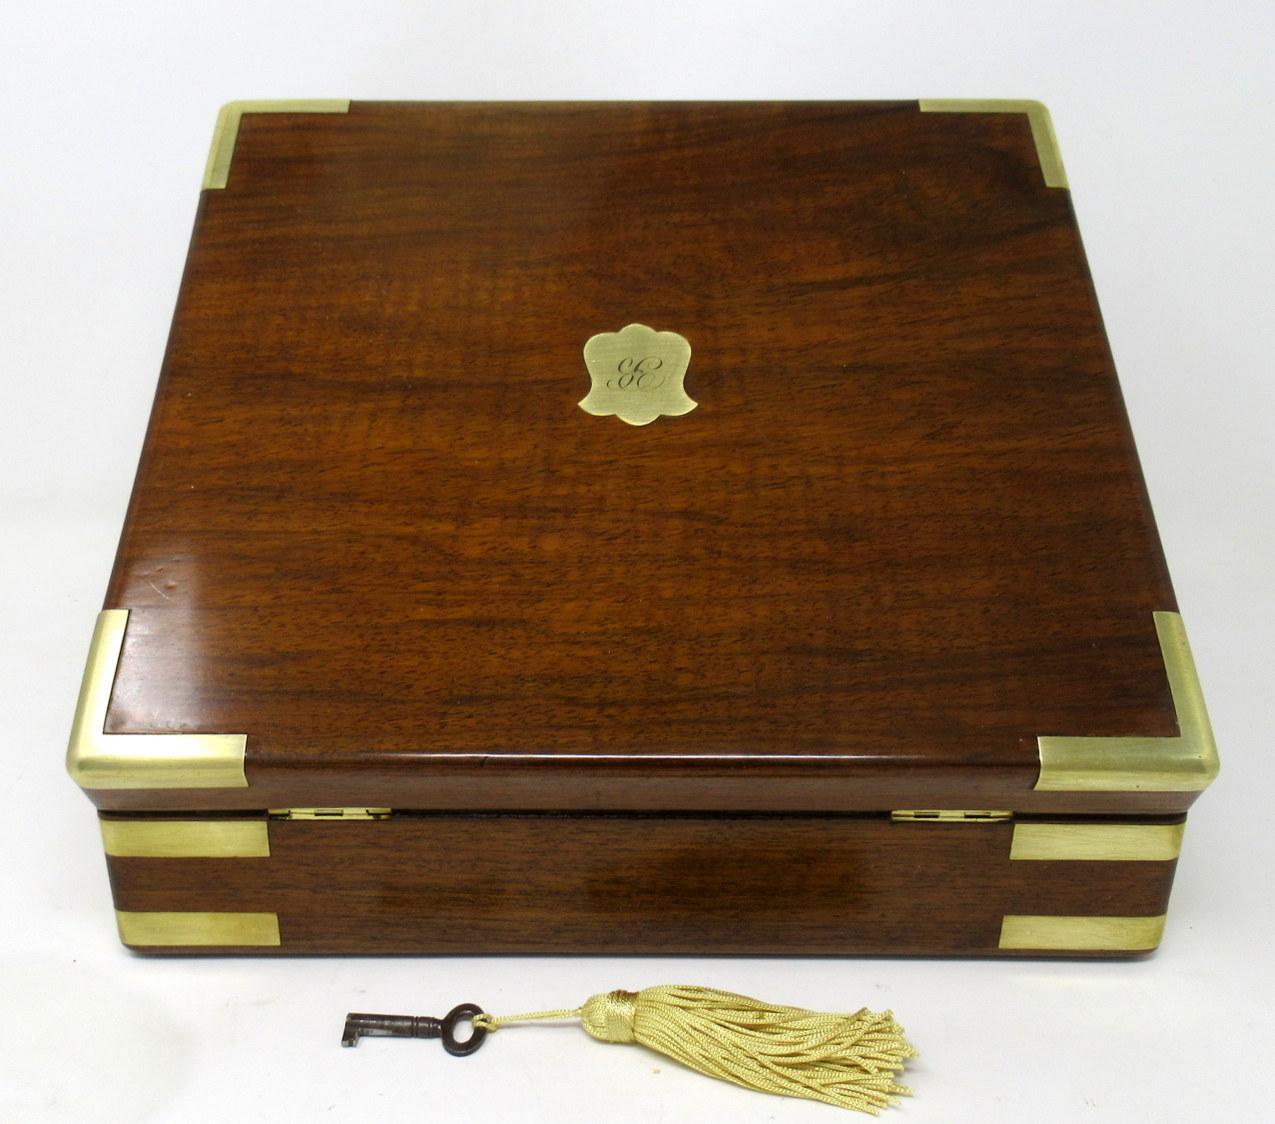 English Antique Vintage Solid Mahogany Wooden Jewelry Box Casket Brass Bound 19th Cent